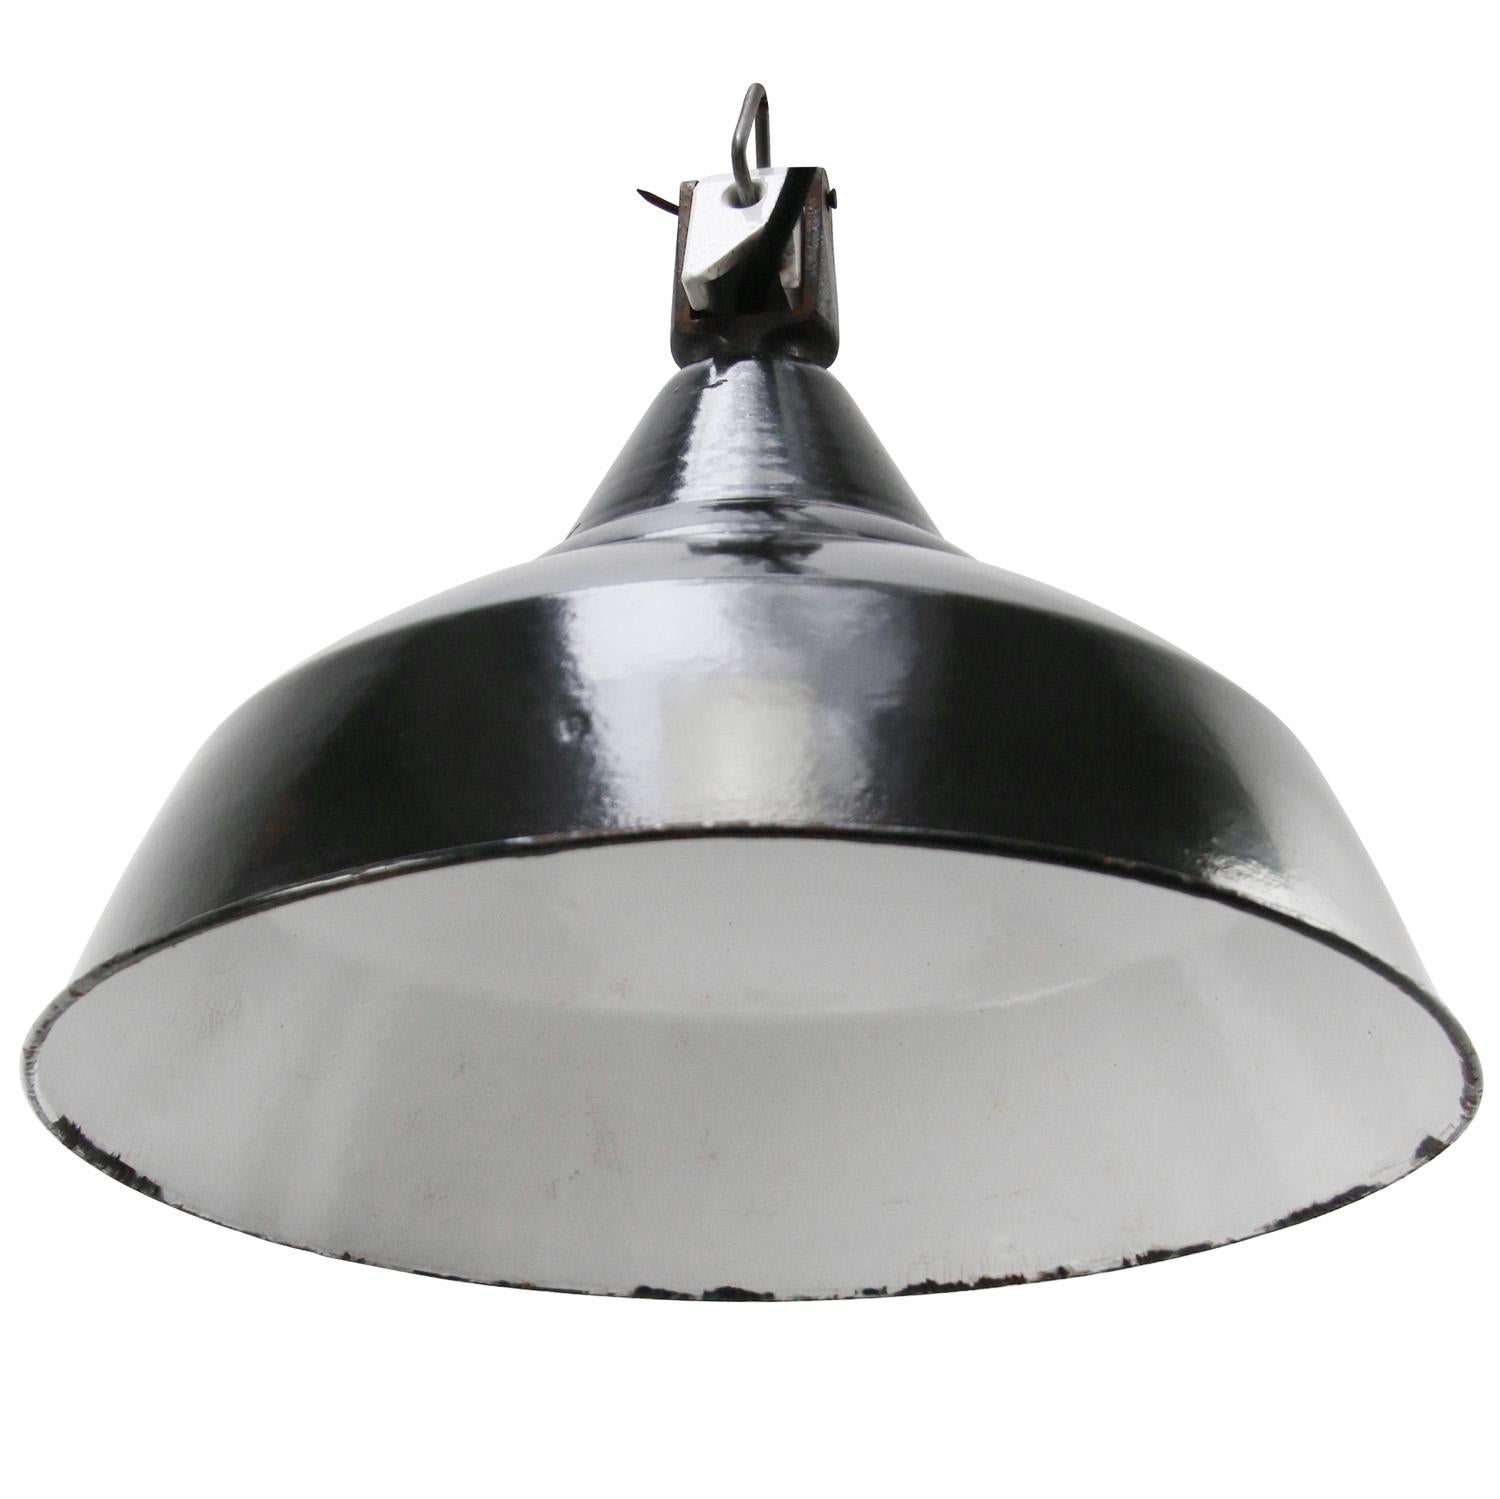 French Black Enamel Vintage Industrial Pendant Light In Good Condition For Sale In Amsterdam, NL